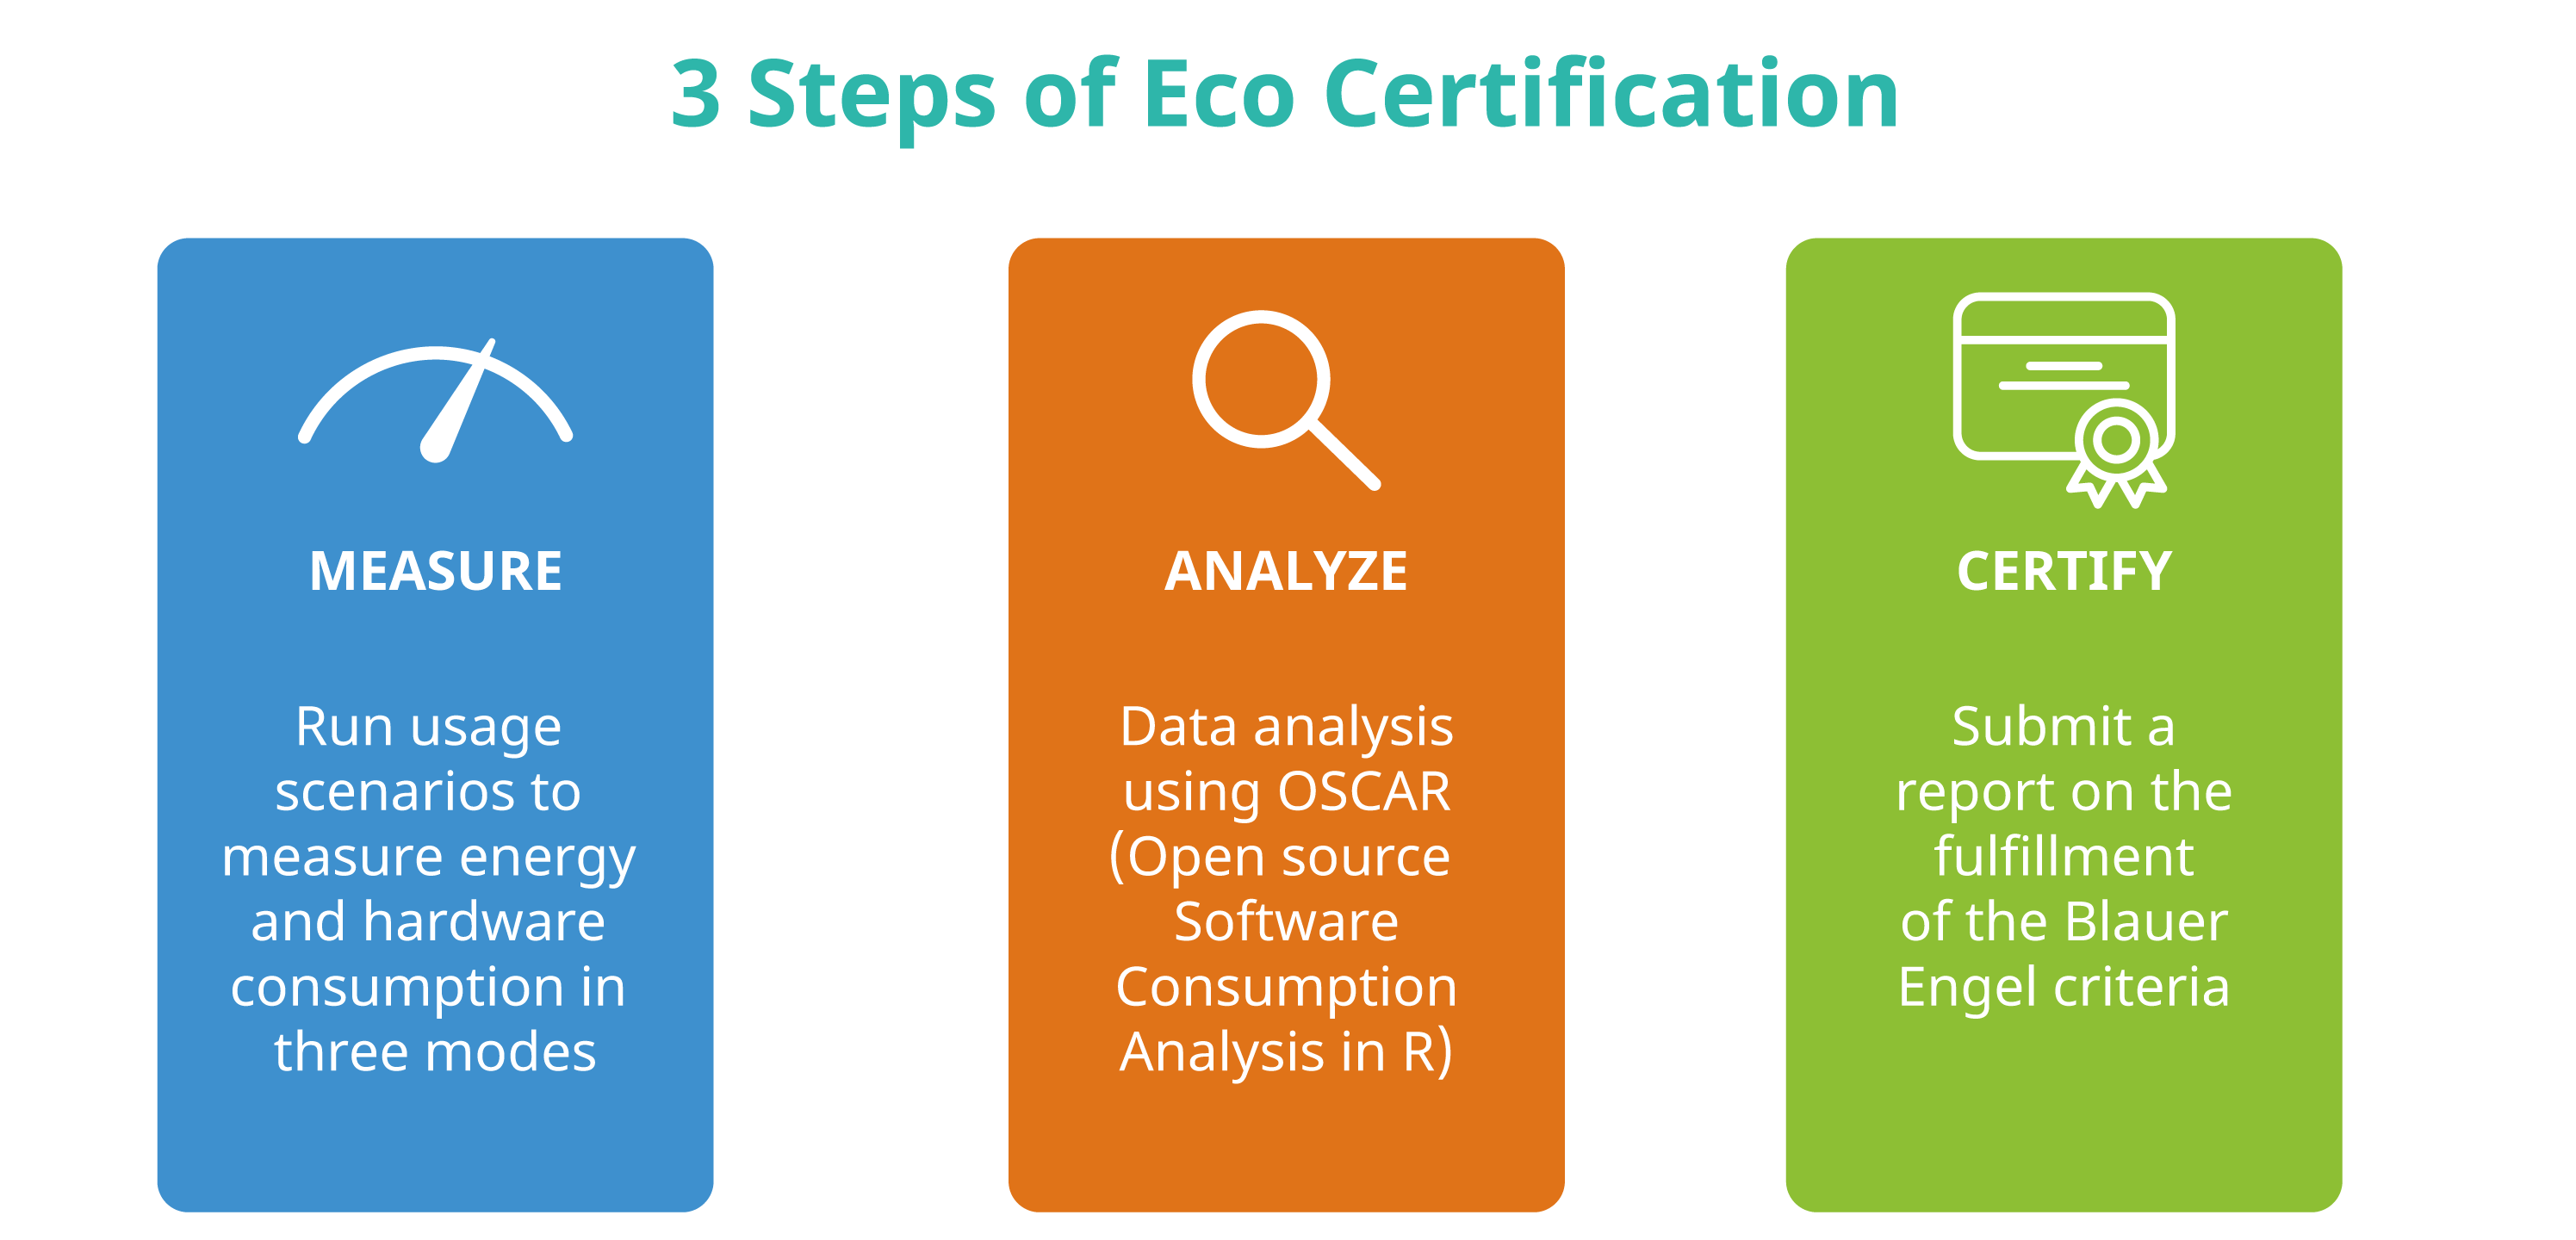 The three steps to eco-certification: 1. Measure, 2. Analyze, 3. Certify. (Image from KDE published under a <a href="https://creativecommons.org/licenses/by-sa/4.0/deed.en">CC BY-SA 4.0 International</a> license. <a href="https://thenounproject.com/icon/certificate-5461357/">Certificate</a> icon by Ongycon licensed under a <a href="https://spdx.org/licenses/CC-BY-3.0.html">CC-BY</a> license. Design by Lana Lutz.)